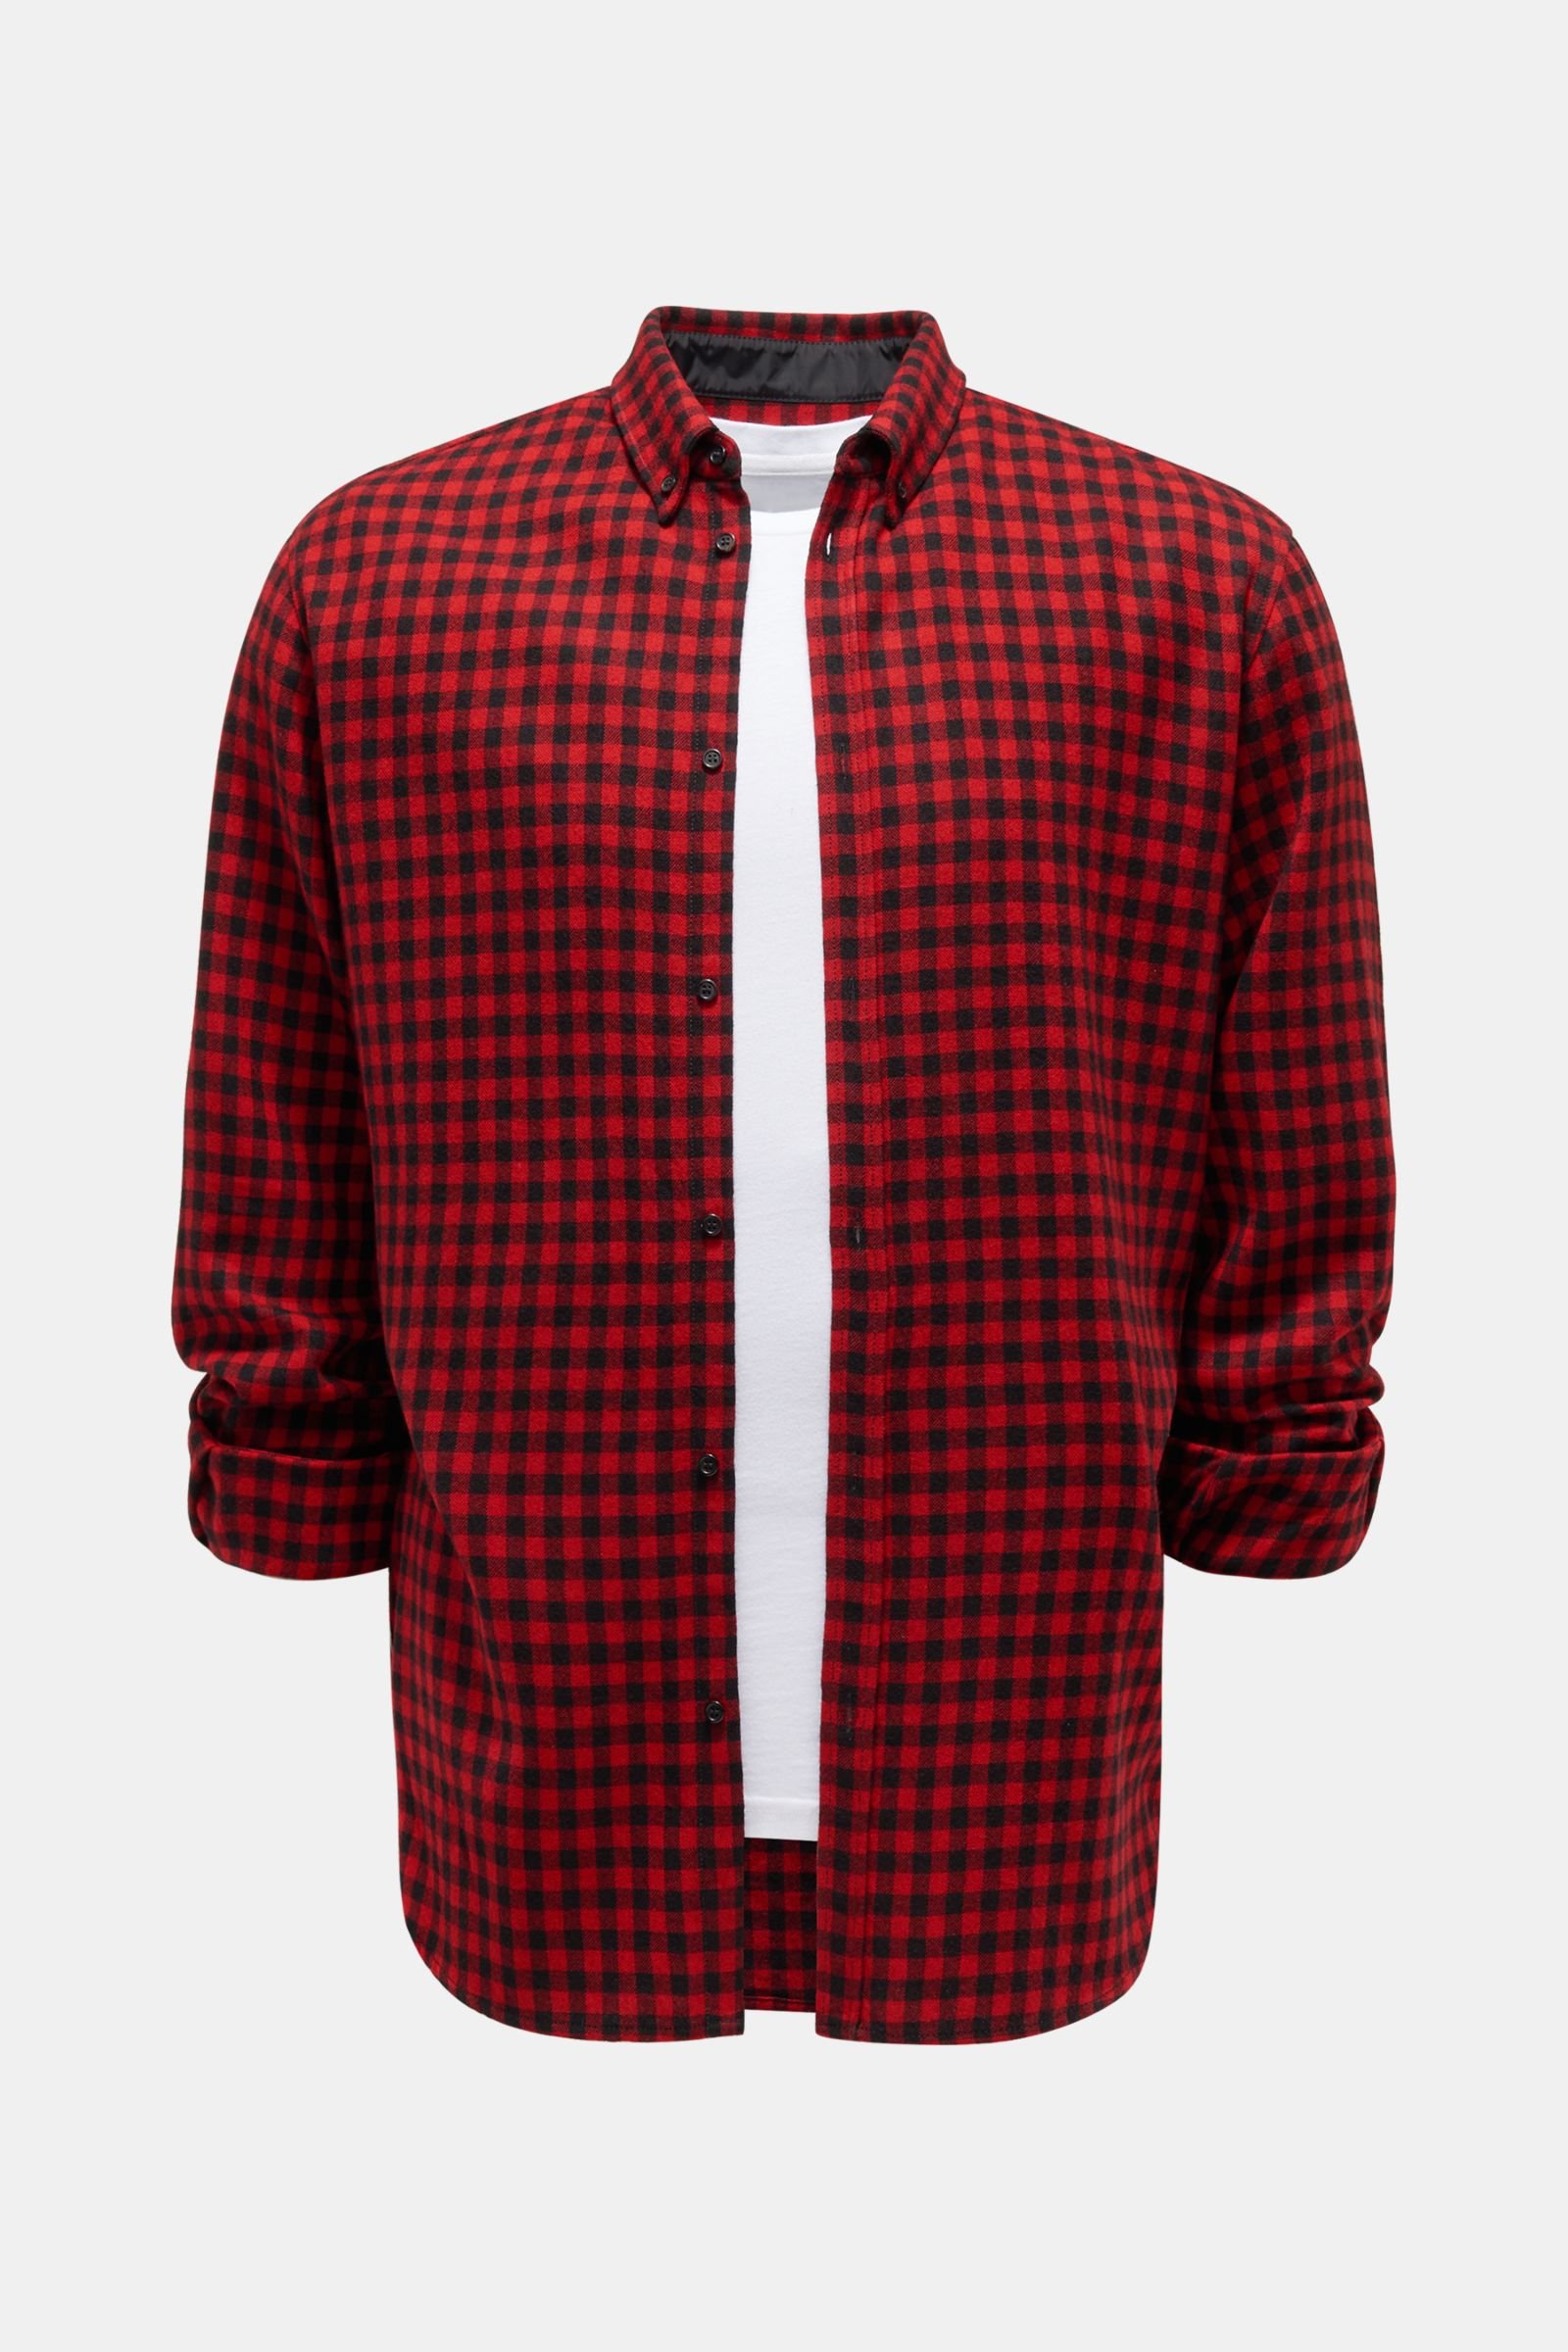 Flannel shirt button-down collar red/black checked